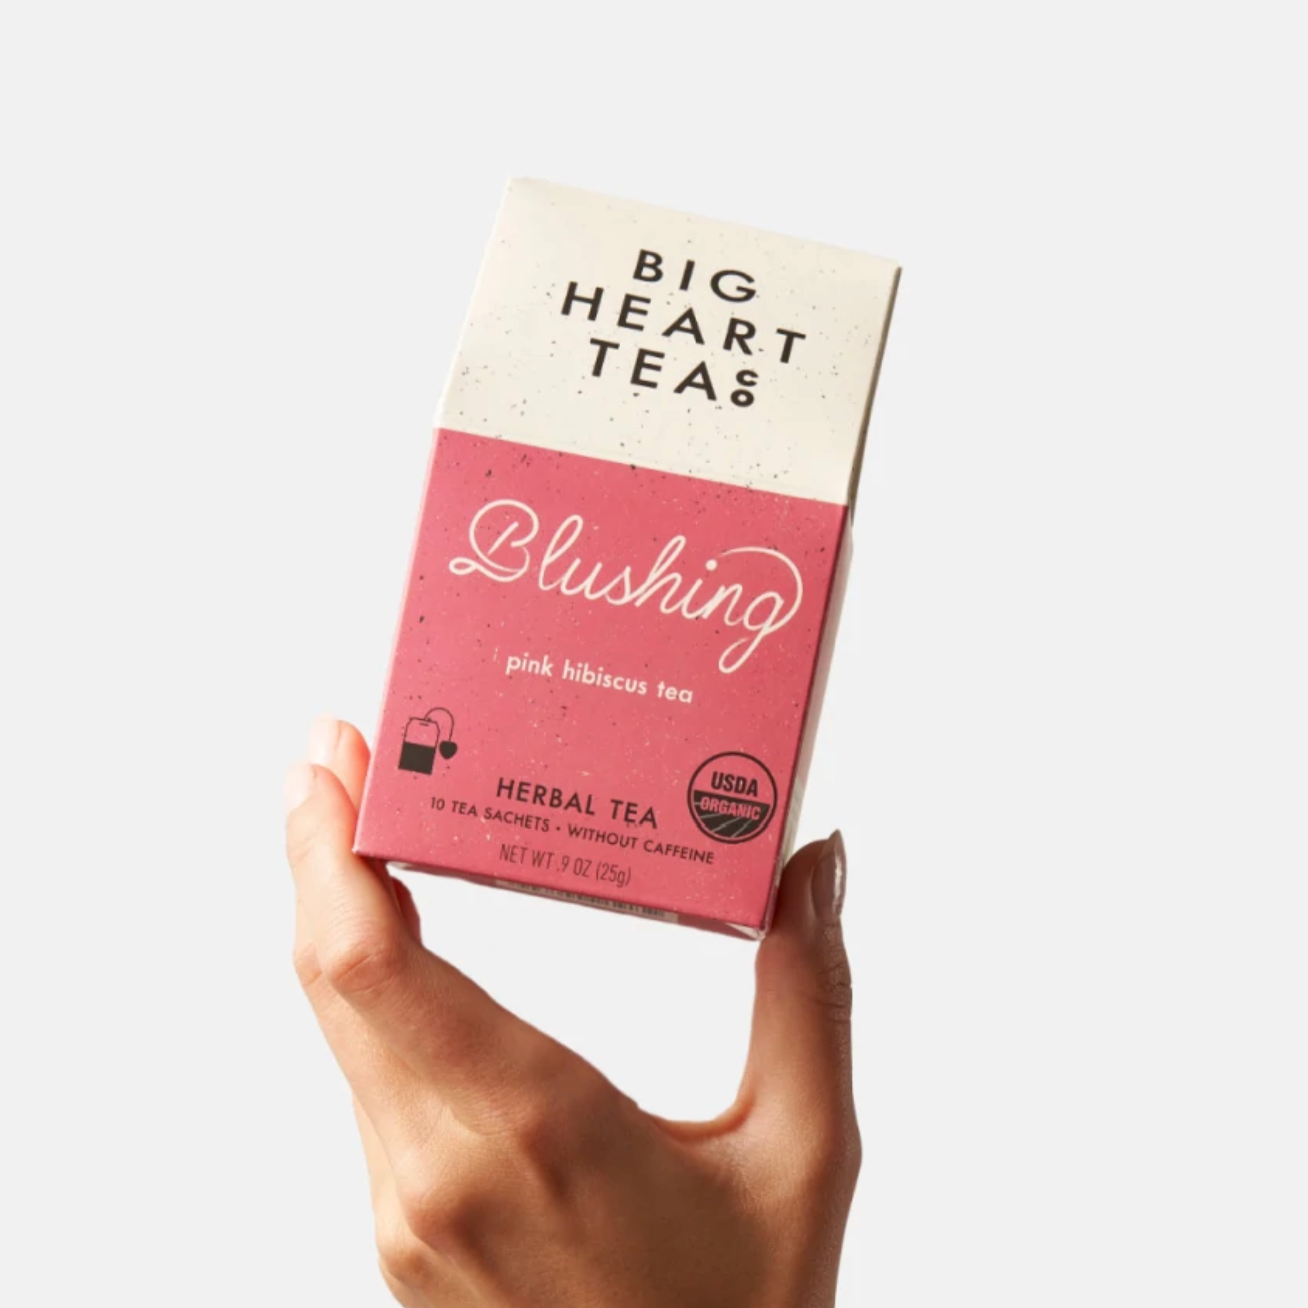 Hand holding box of pink blushing tea in the air